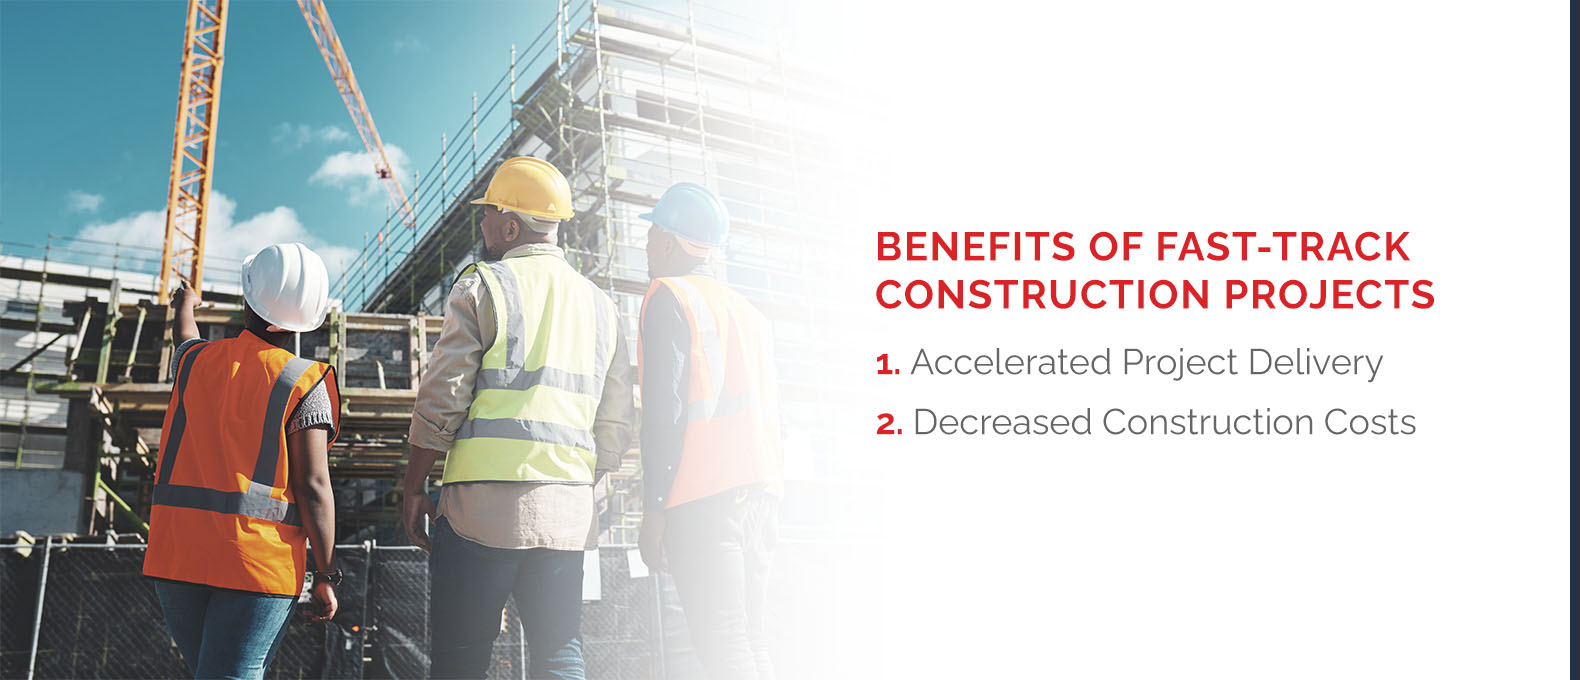 https://www.hrconstruction.com/wp-content/uploads/2016/06/benefits-of-fast-track-construction-projects.jpg